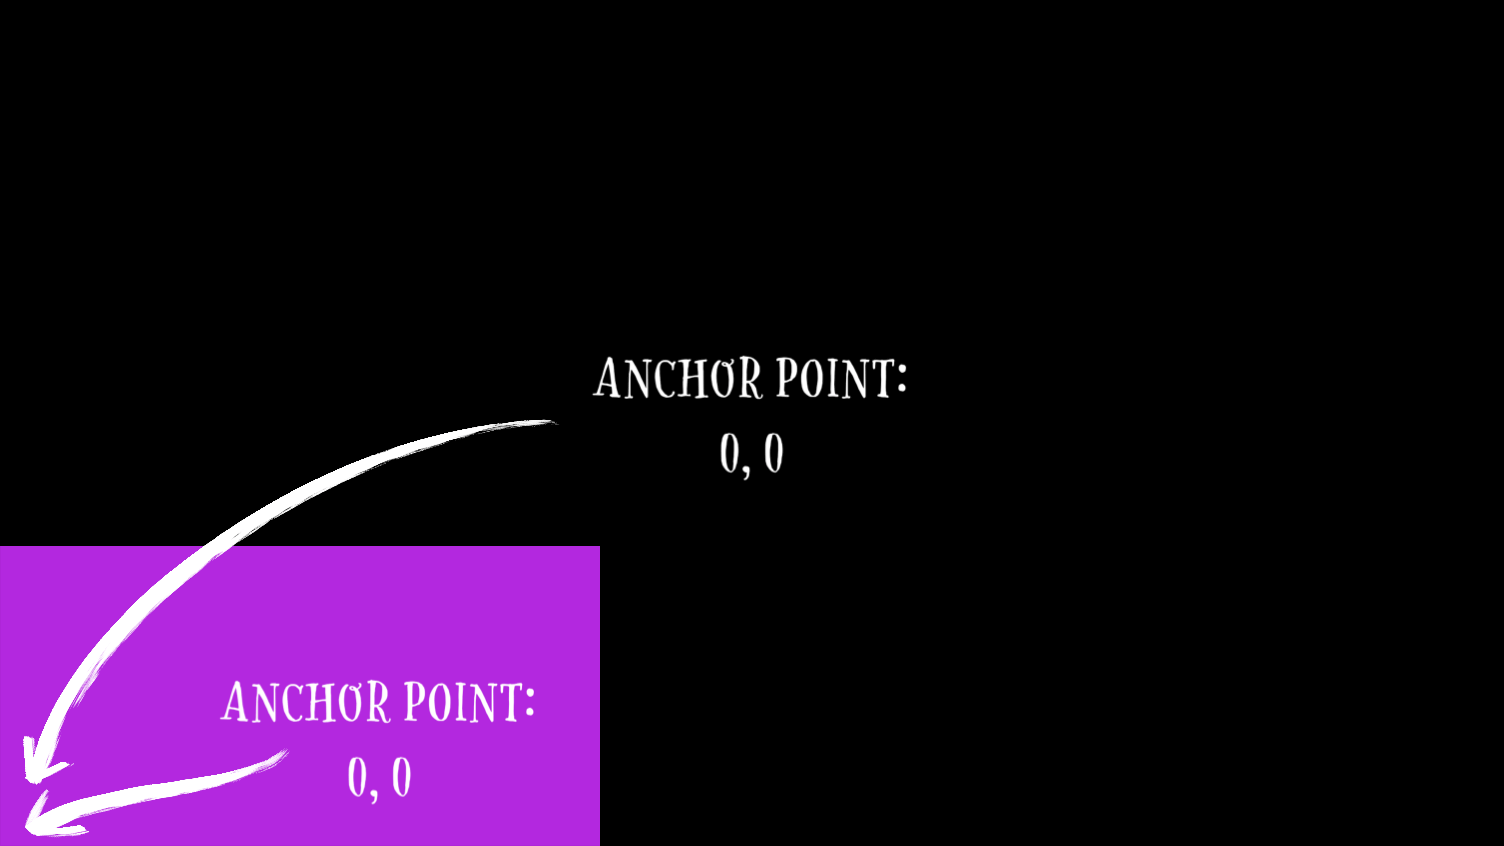 Image of a small purple rectangle on a large black rectangle. The bottom left corner of the purple rectangle is aligned with the bottom left corner of the image. There are two captions, one in the black rectangle that says Anchor Point: 0, 0 and one on the purple rectangle that says Anchor Point: 0, 0